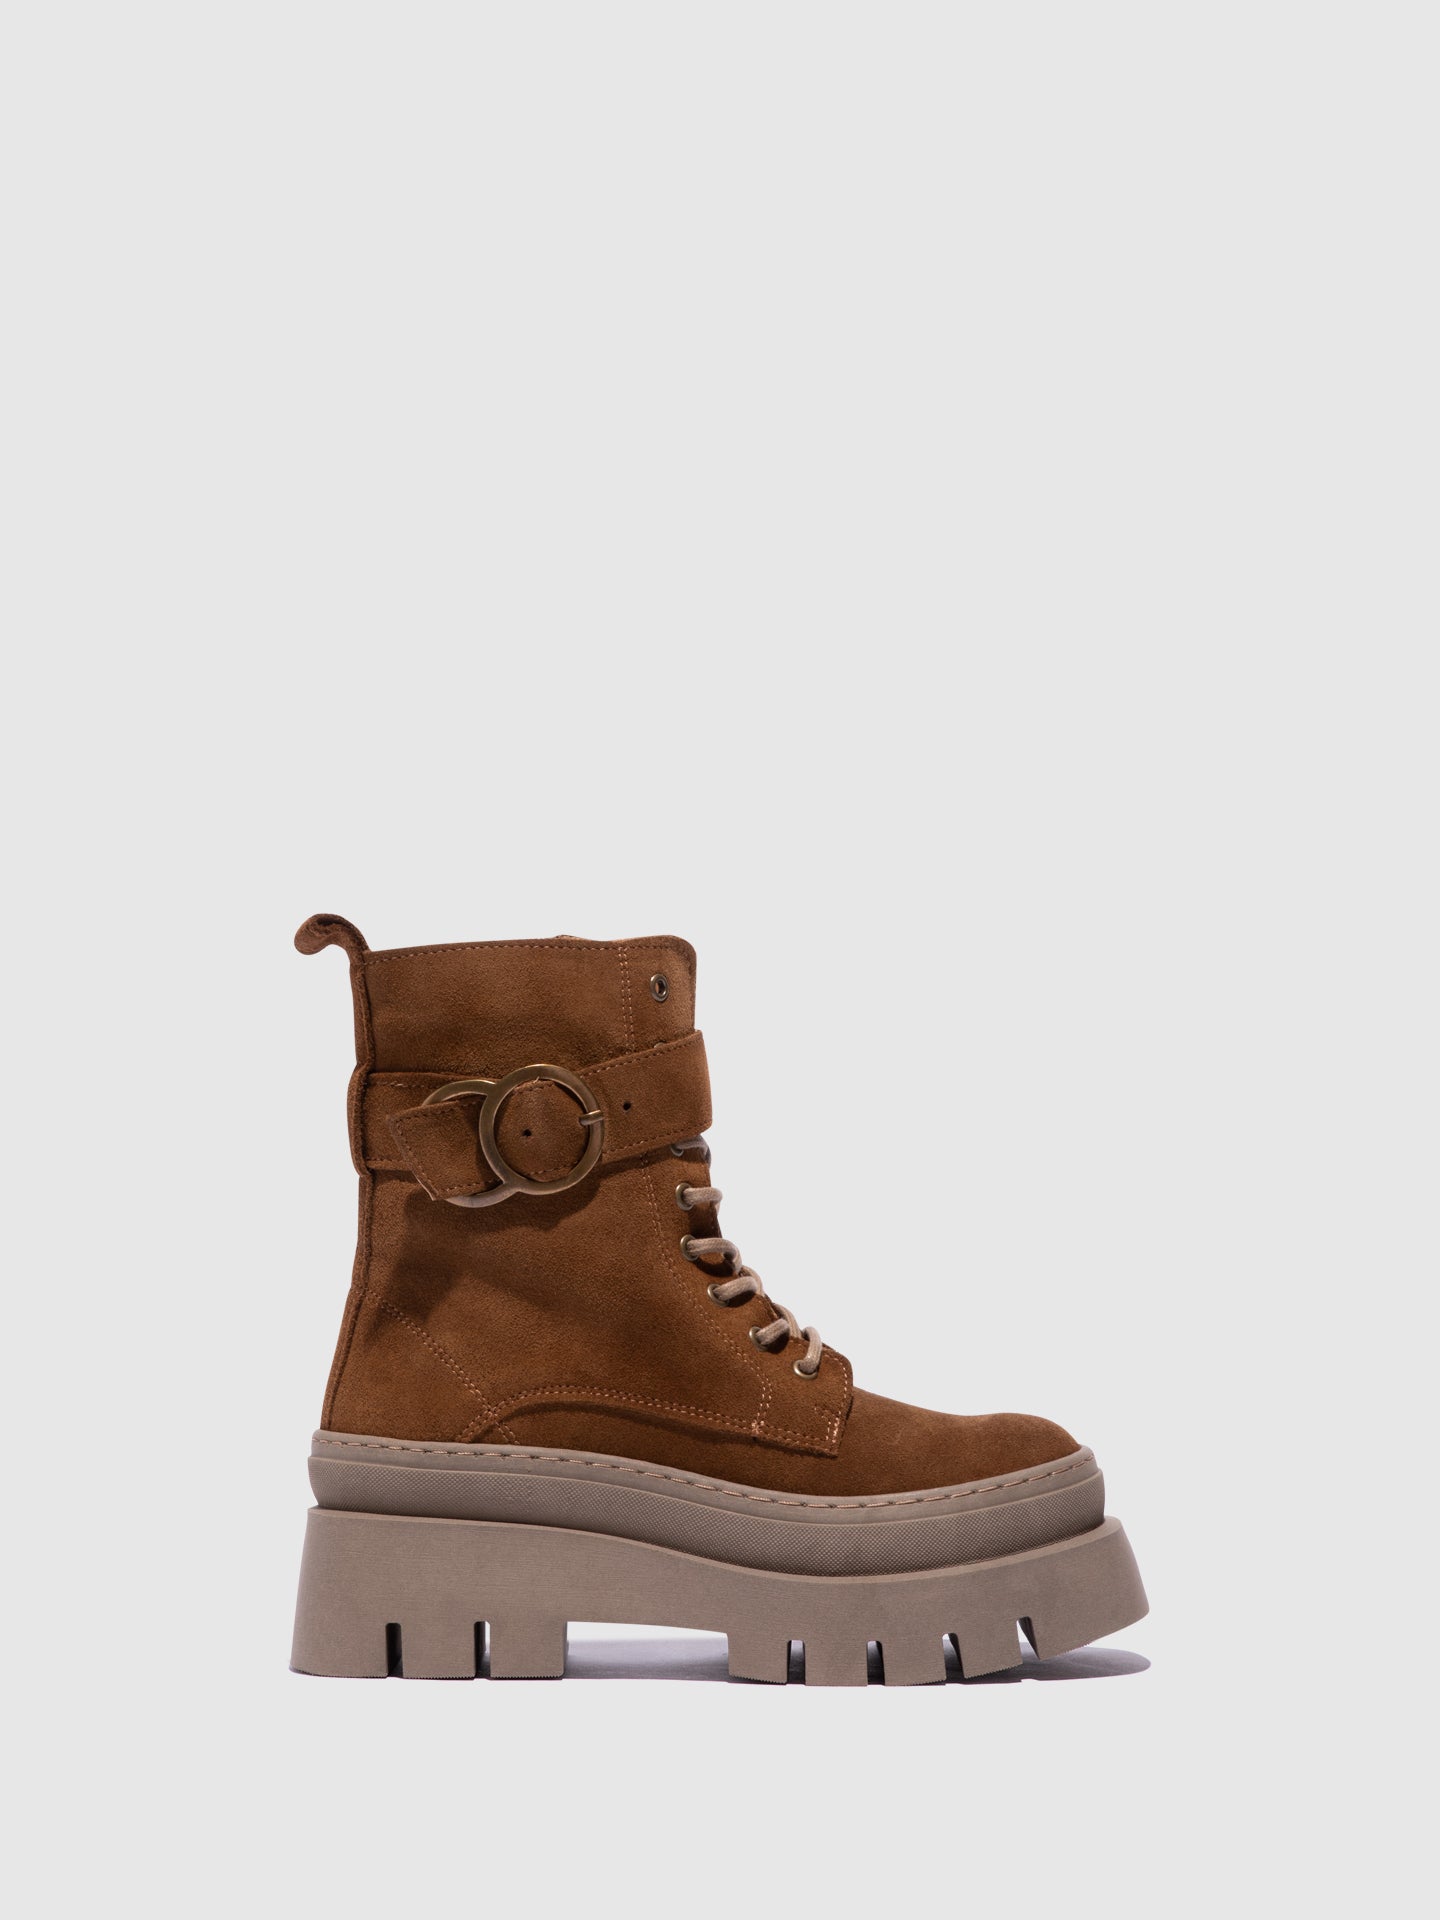 Fungi Camel Lace-up Boots